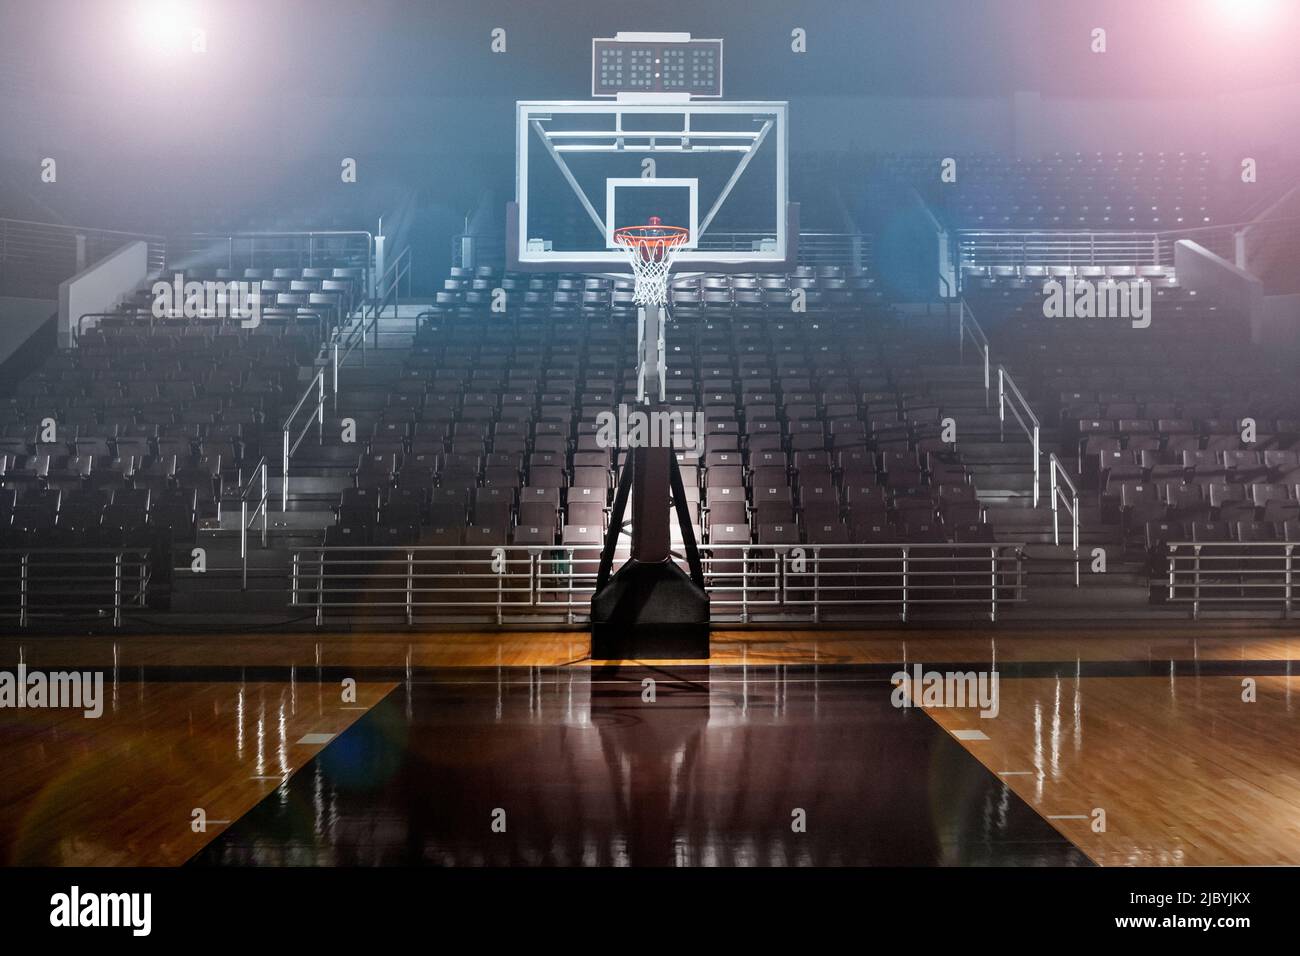 Empty basketball arena with dramatic lighting, view from free throw line in front of goal on the court Stock Photo